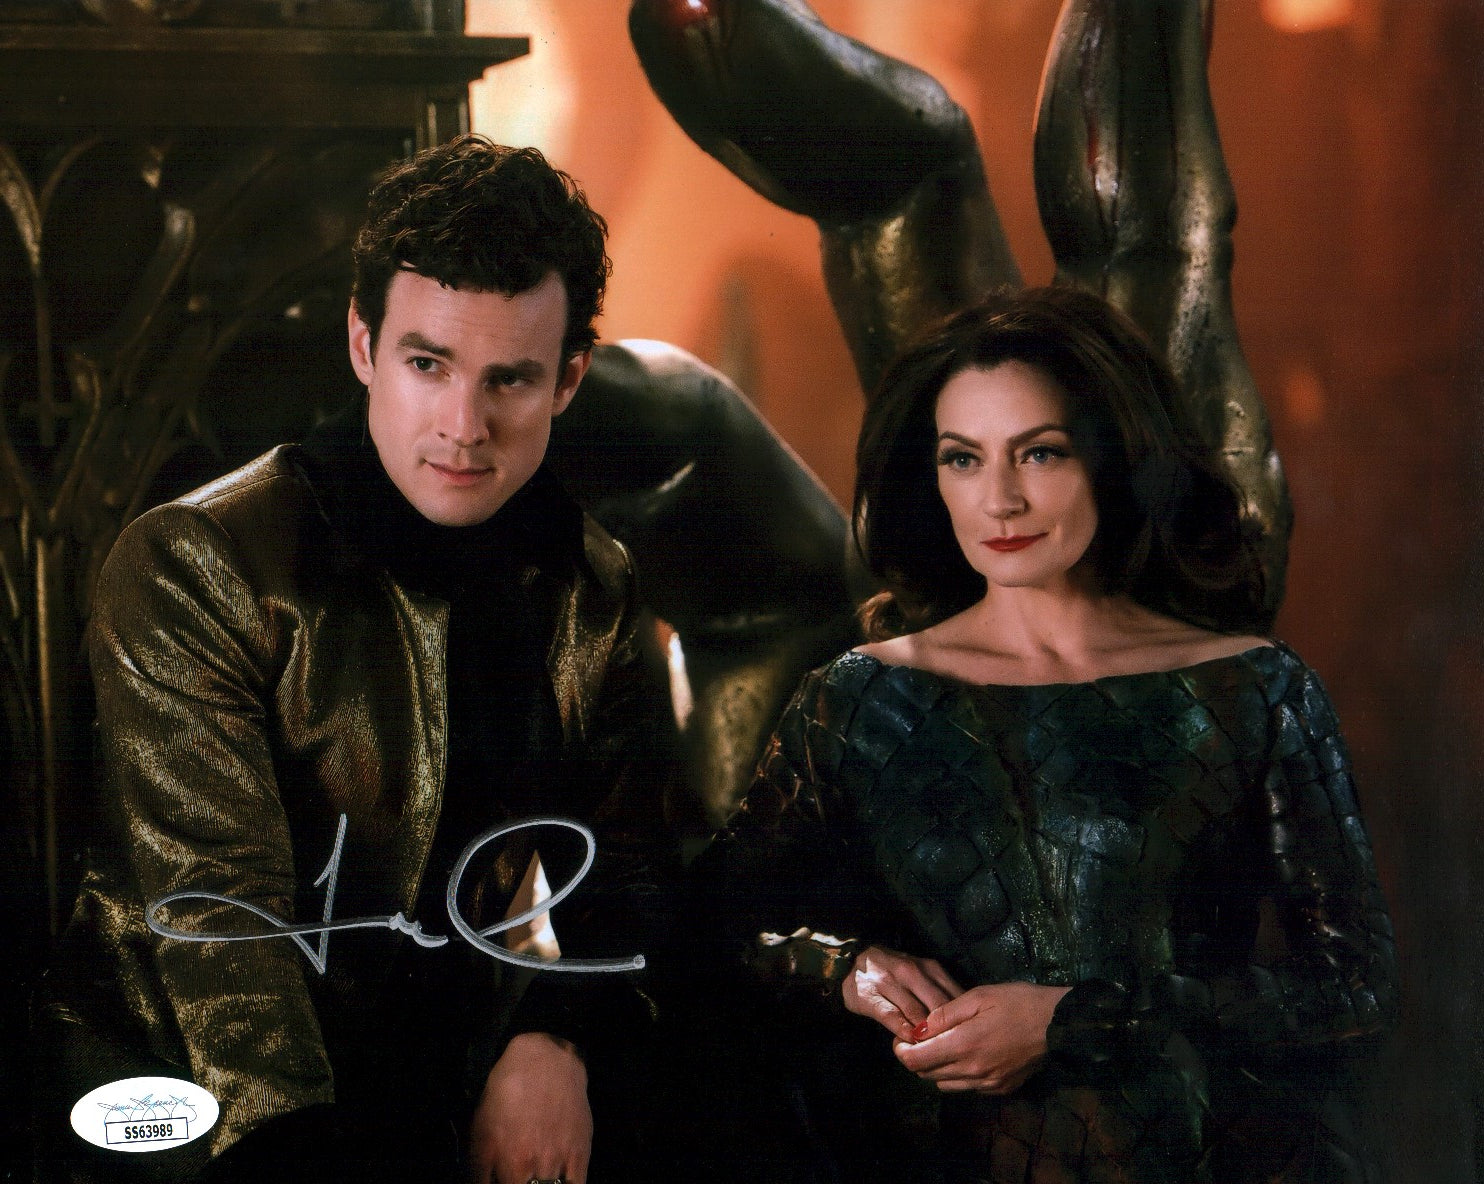 Luke Cook Chilling Adventures of Sabrina 8x10 Signed Photo JSA Certified Autograph